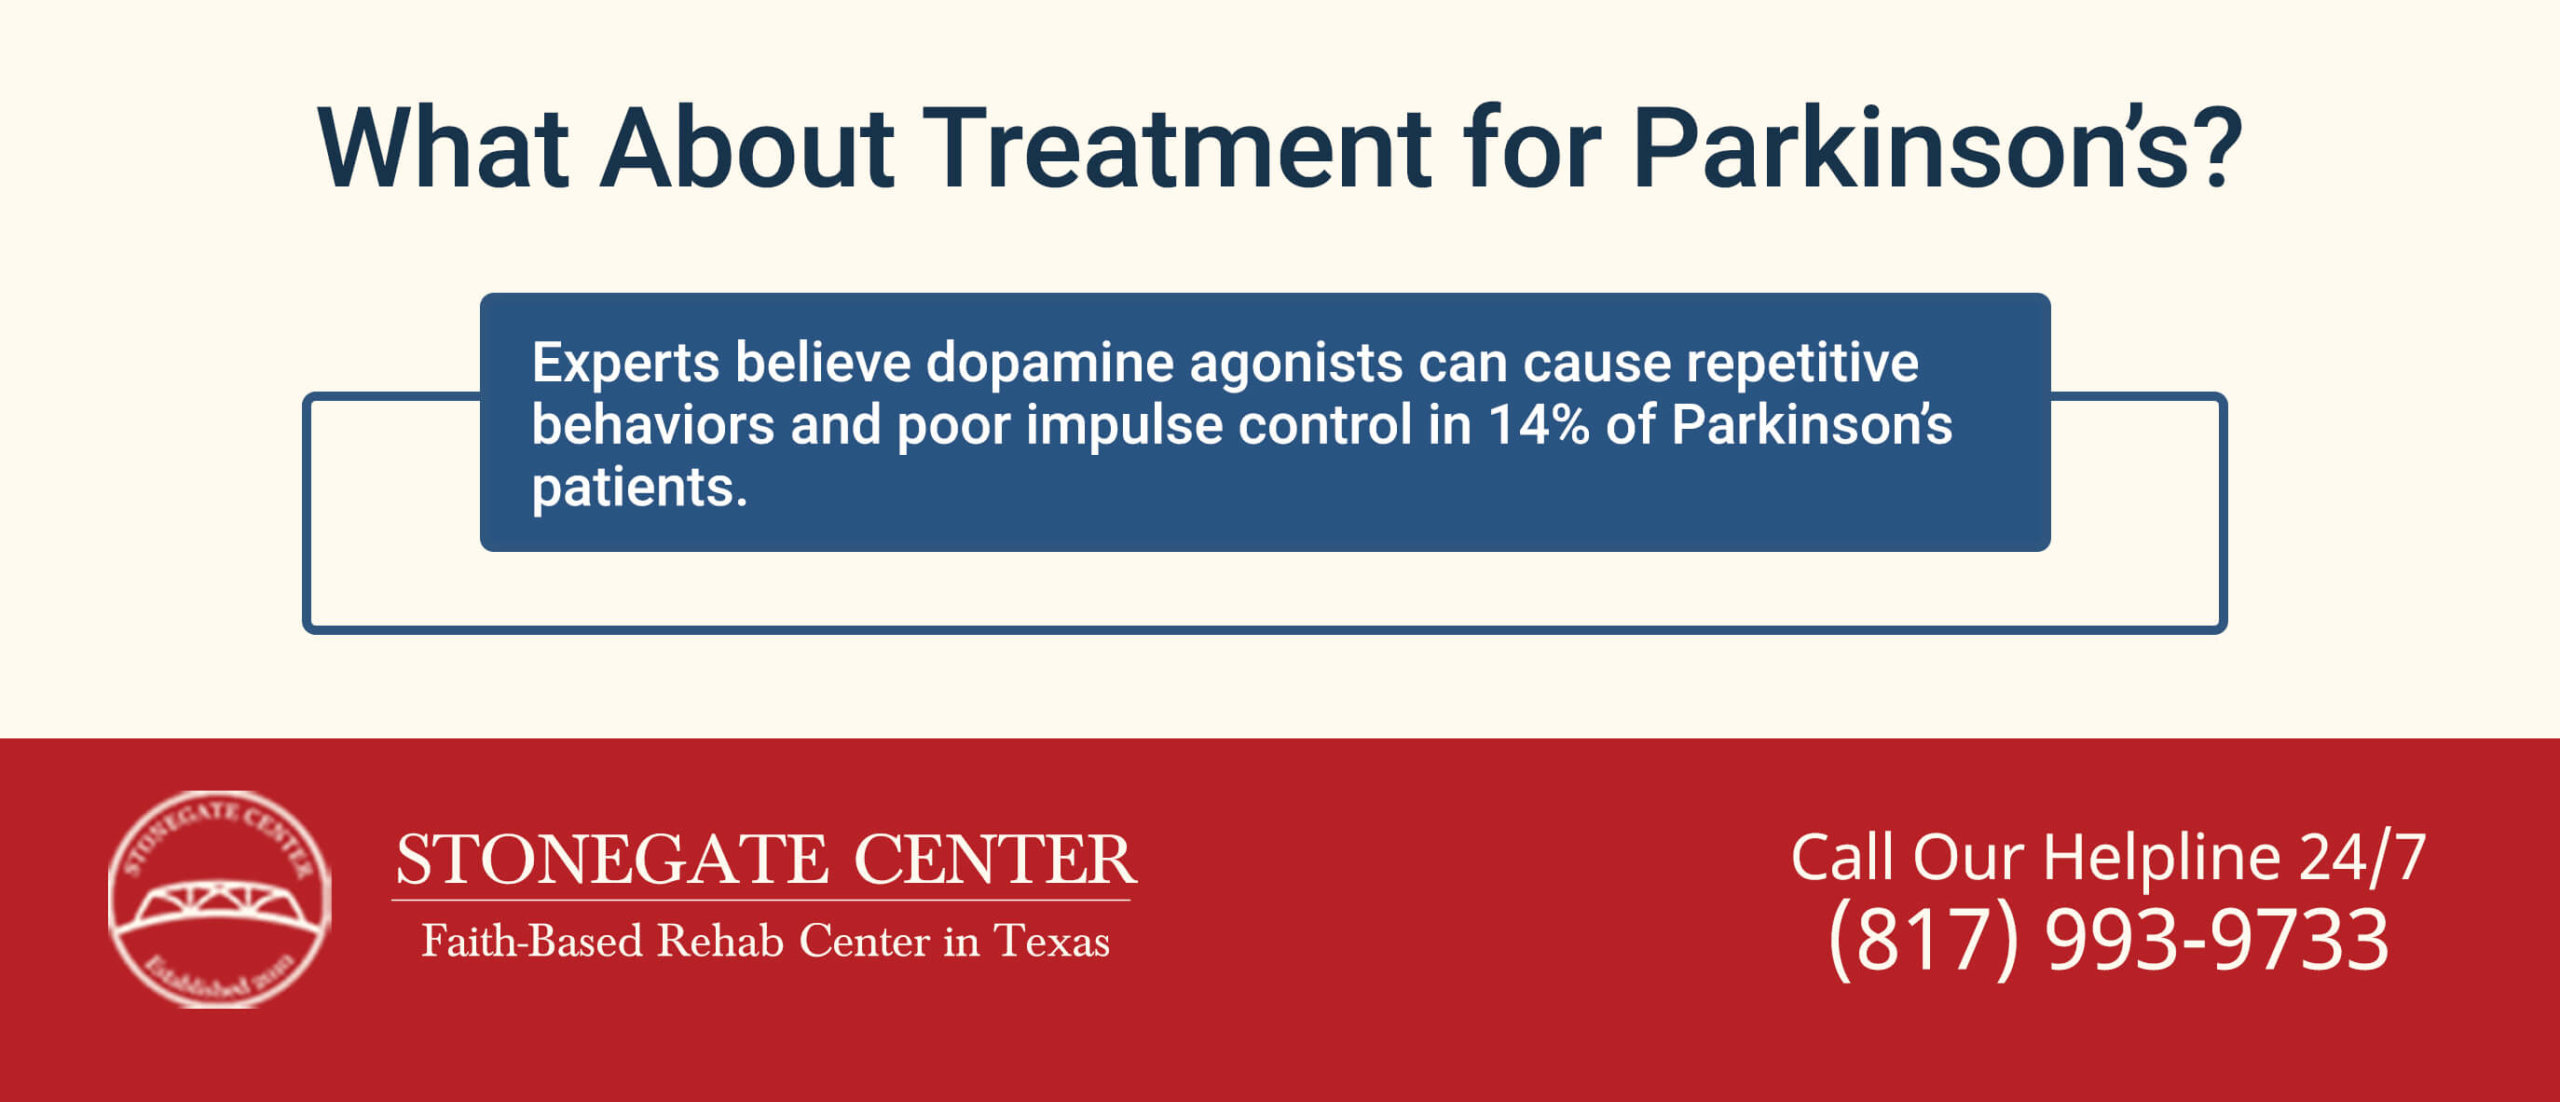 Stonegate Center Blog - Parkinson's Disease Can Tell Us About Addiction - Treatment for Parkisions Infographics